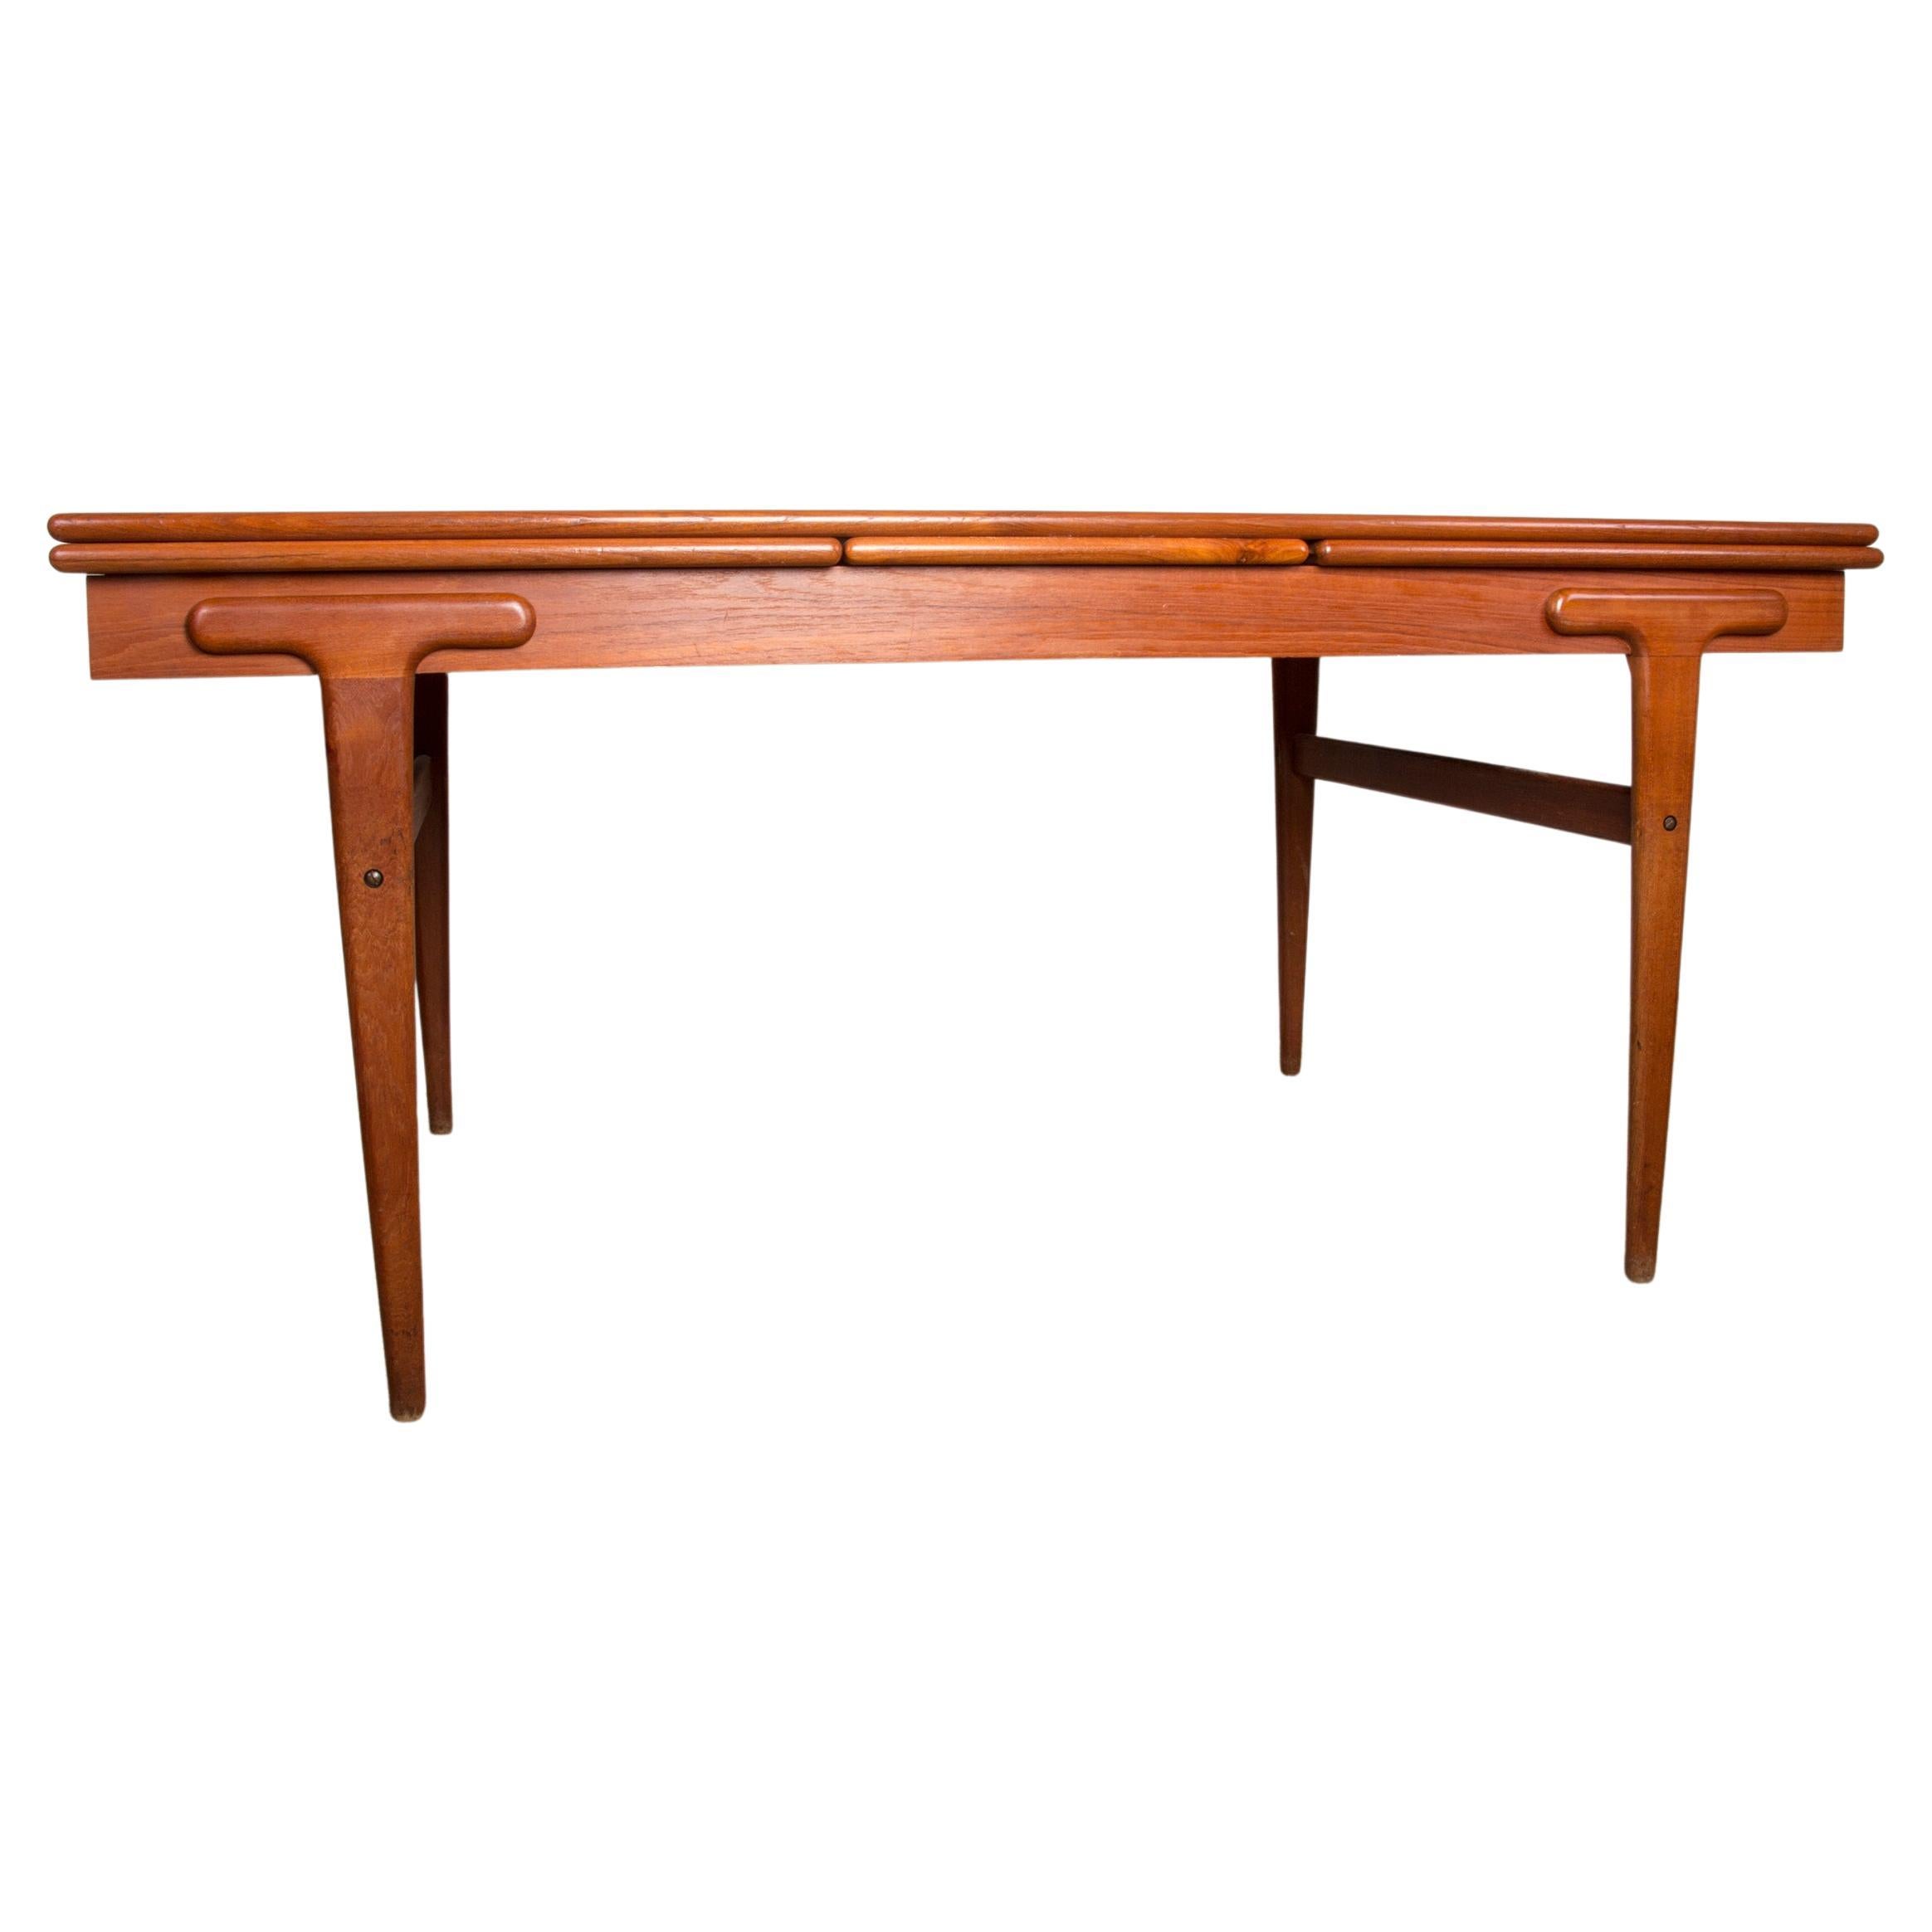 Very large extendable Danish teak dining table by Ejvind Johansson for Ivan Gern